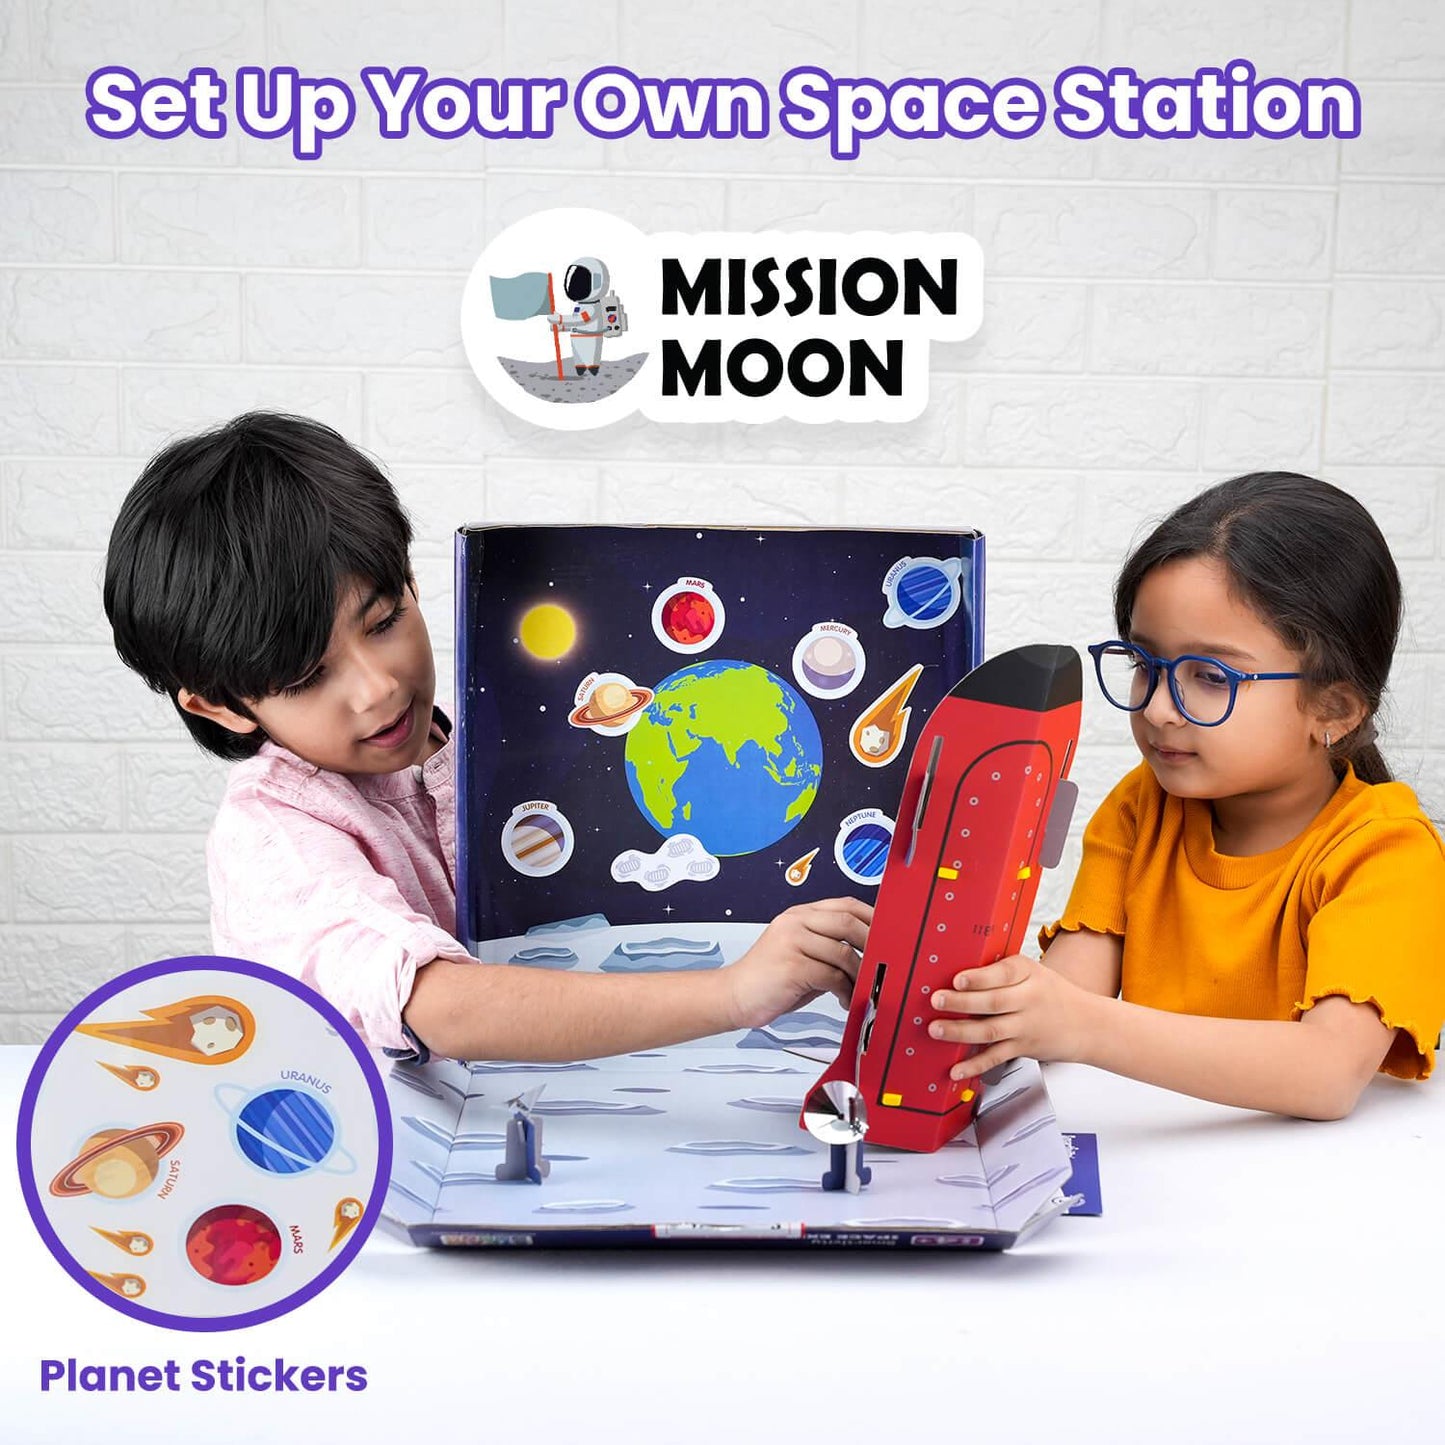 Smartivity Space Explorer DO-IT-YOURSELF, 5-IN-1 STEAM ACTIVITY KIT (Pack of 3)